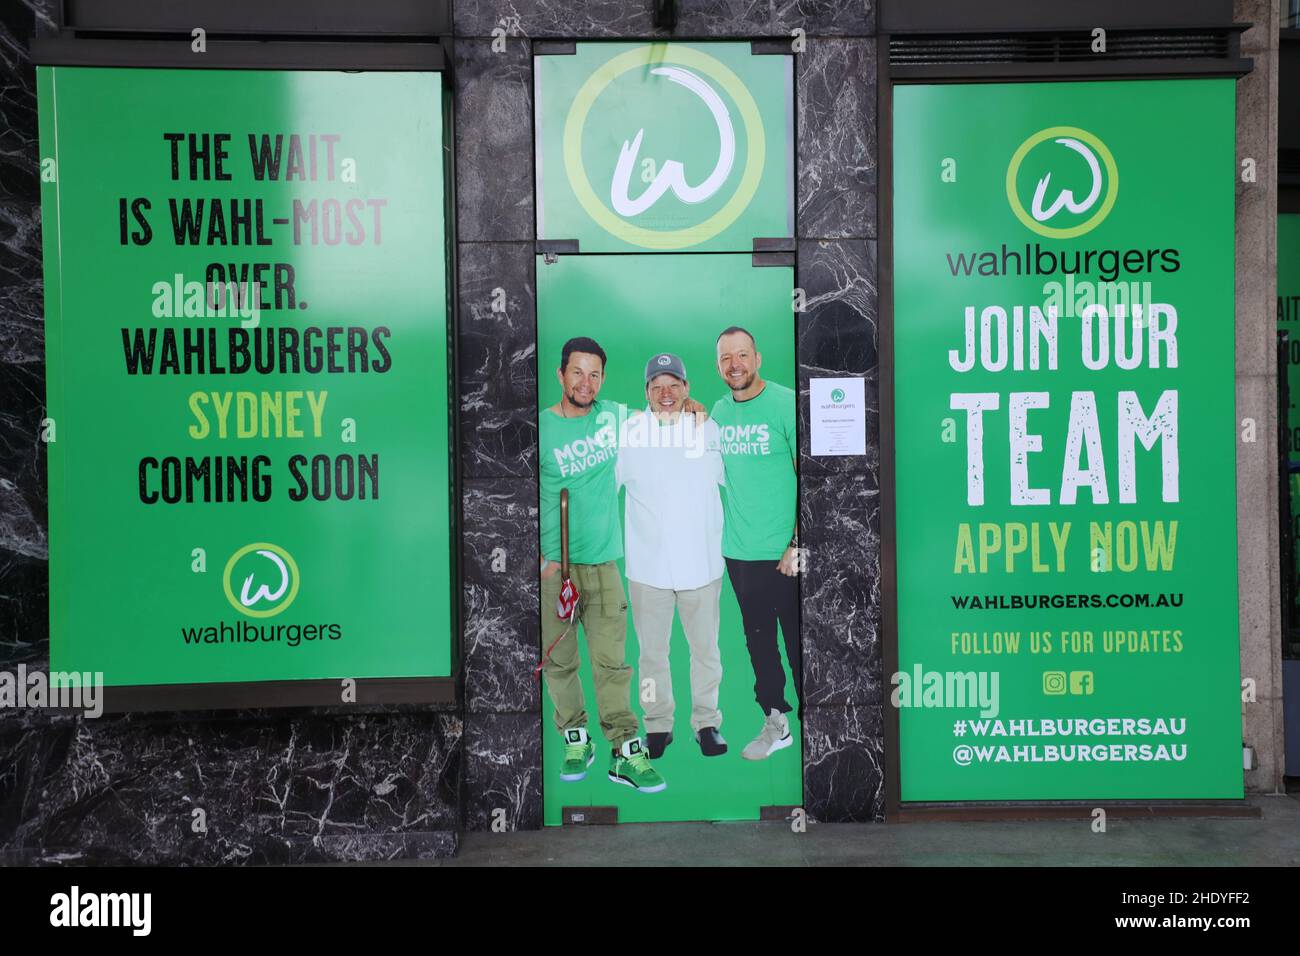 Hollywood star Mark Wahlberg's burger chain Wahlburgers is expected to open its first Australian store soon, located at 7 Macquarie Street, Opera Quay Stock Photo